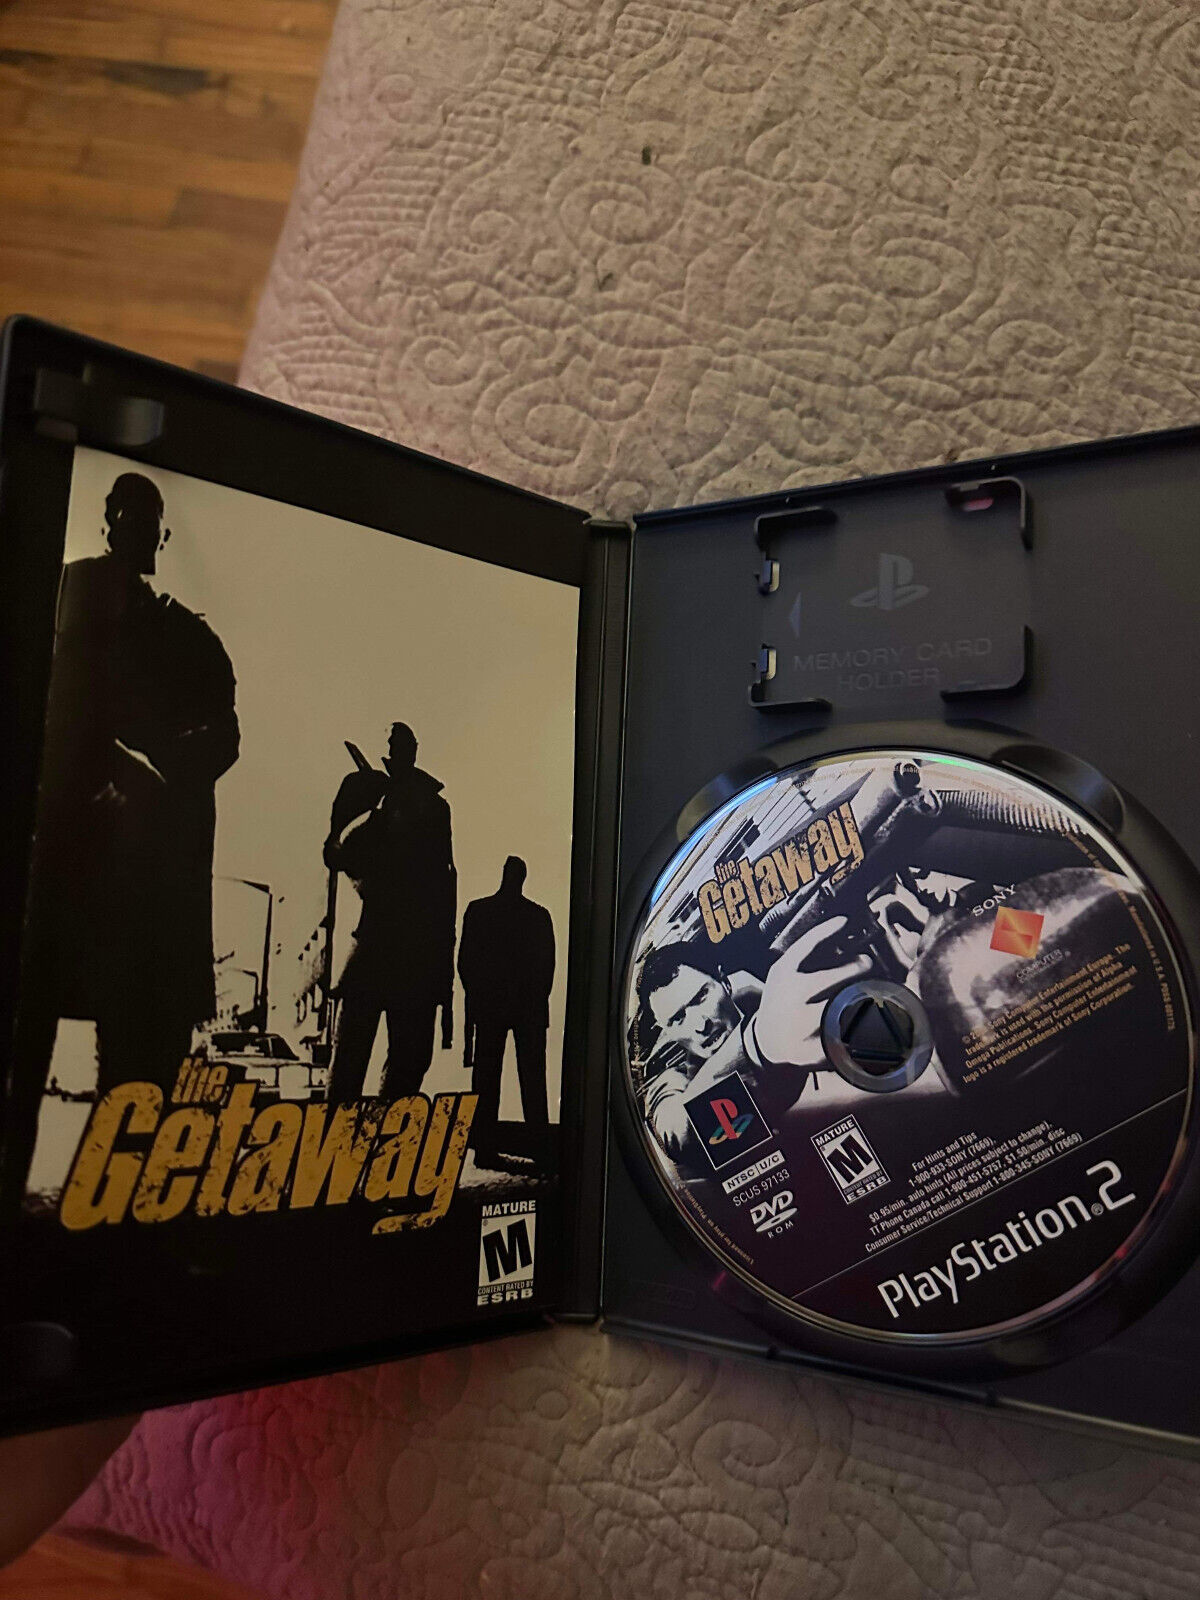 The Getaway PlayStation 2 PS2 Complete CIB Tested w Manual